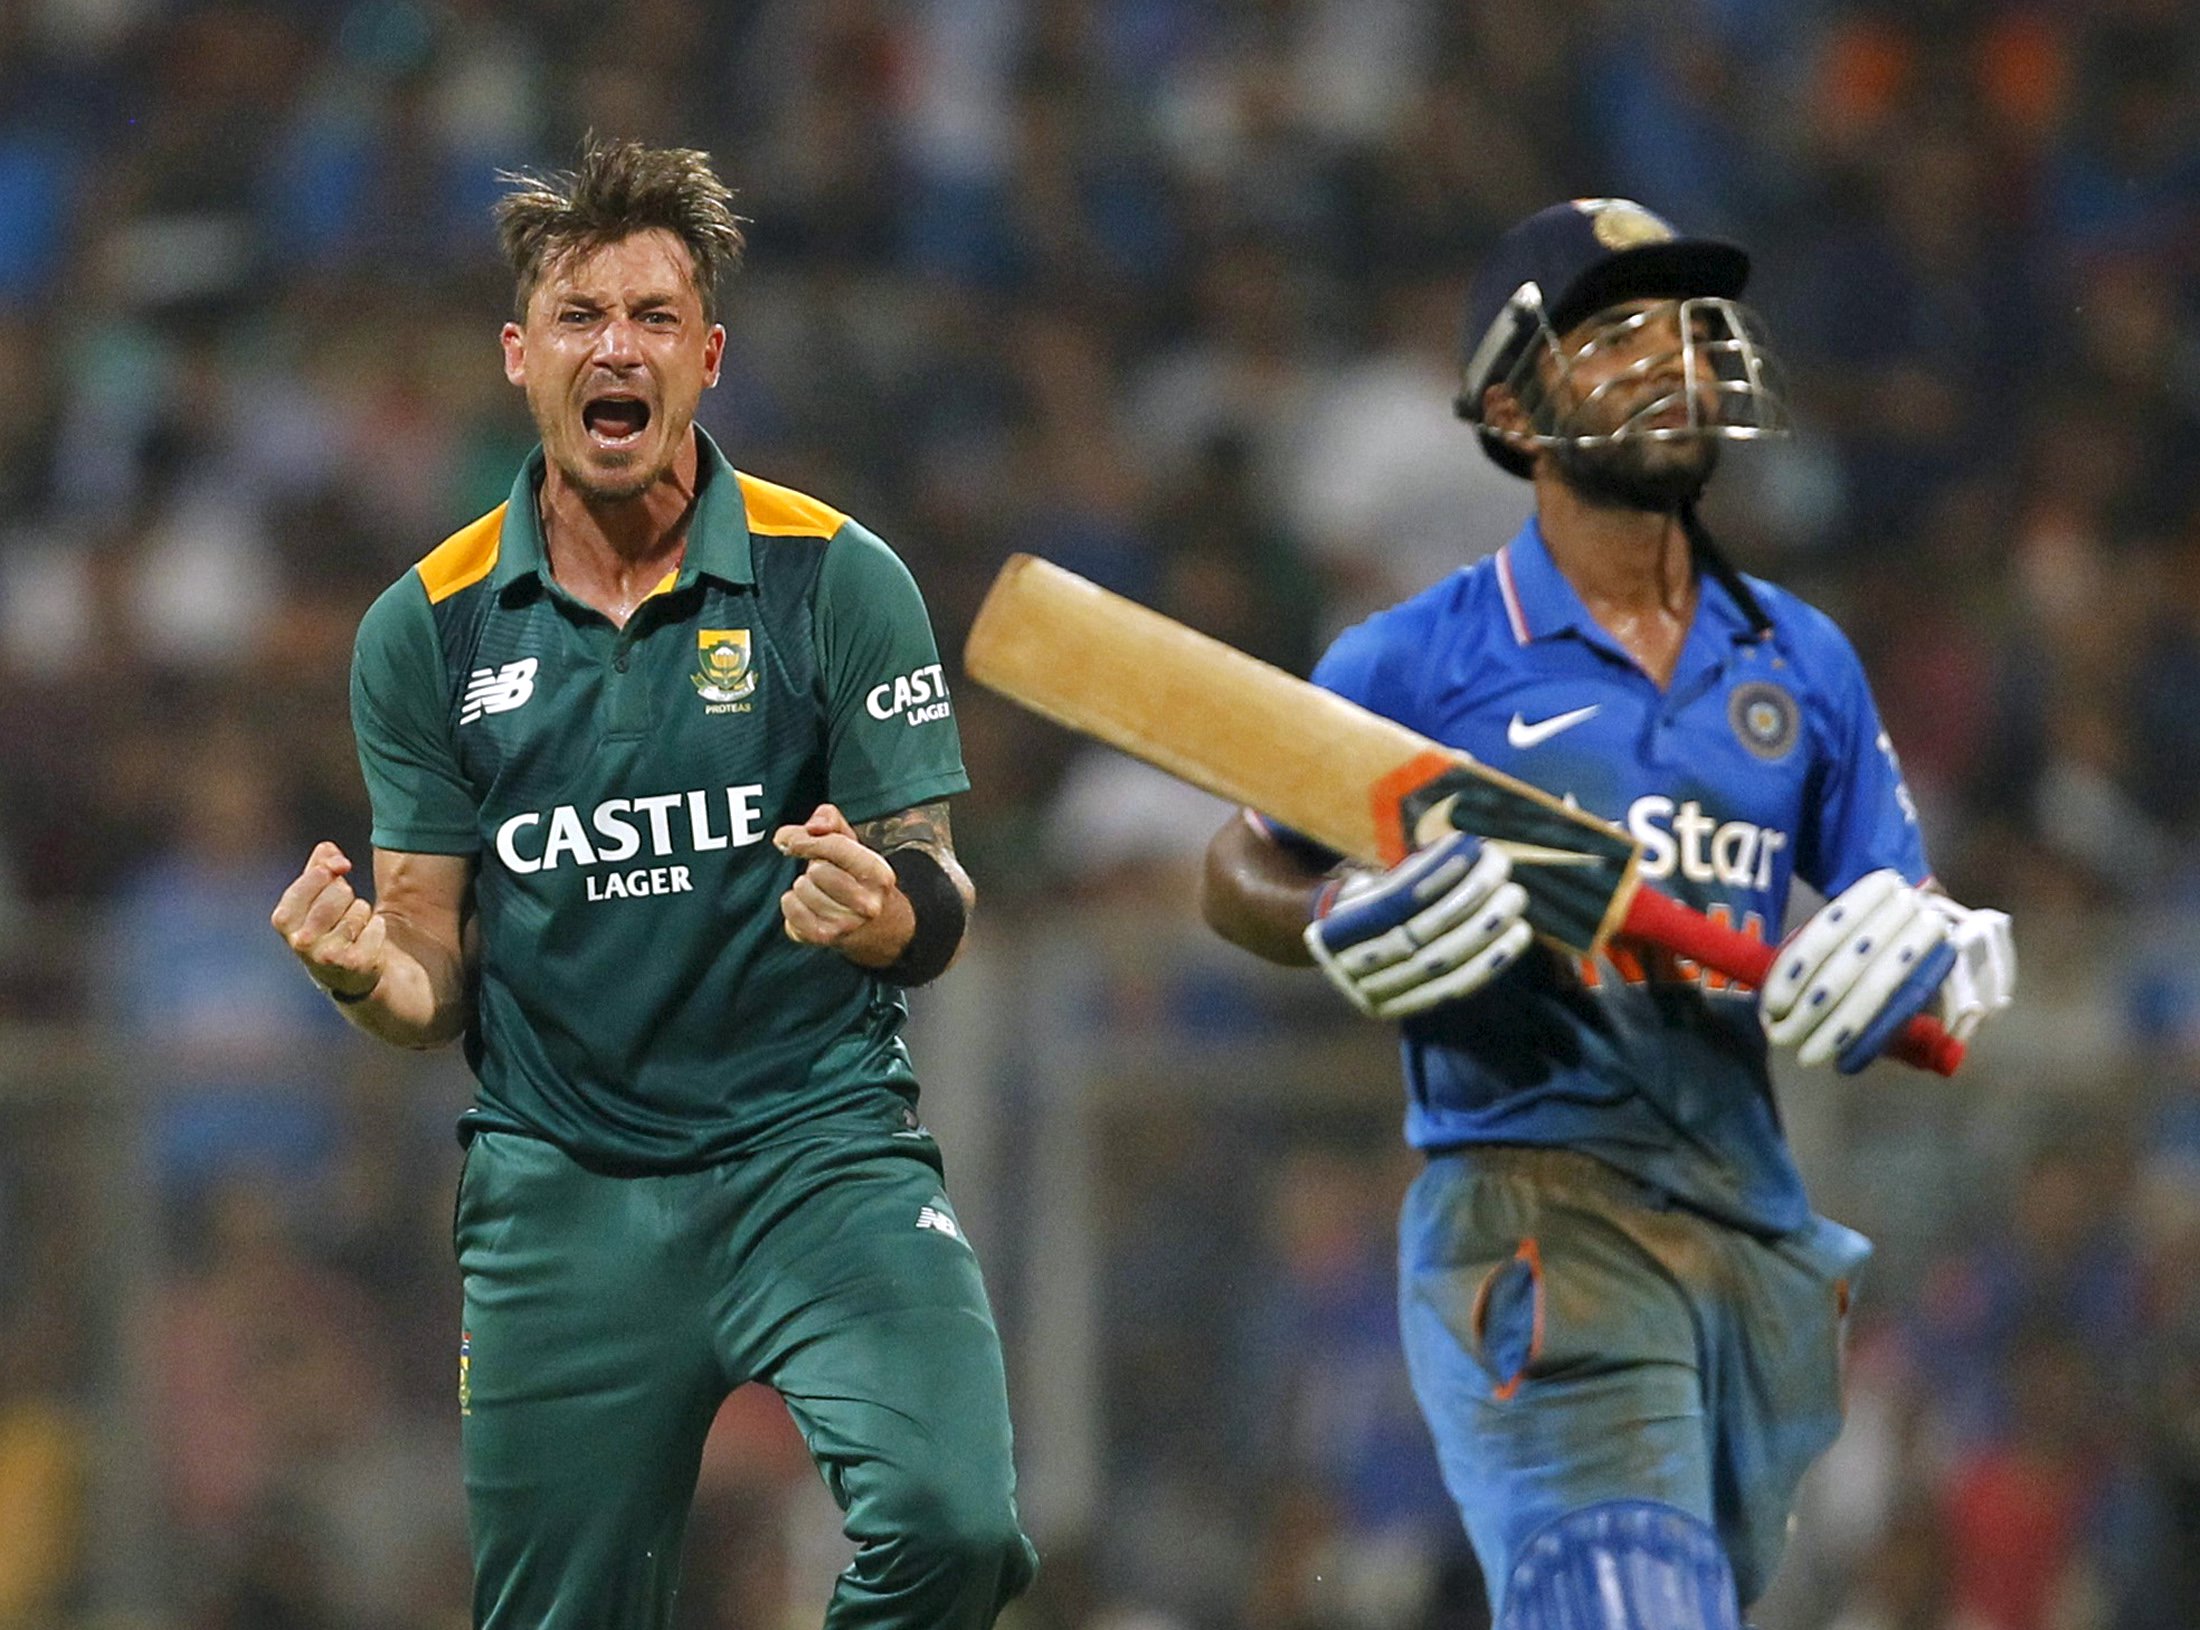 South Africa's Dale Steyn (left) celebrates taking the wicket of India's Ajinkya Rahane during their fifth and final one-day international cricket match in Mumbai, India, October 25, 2015. Photo: Reuters